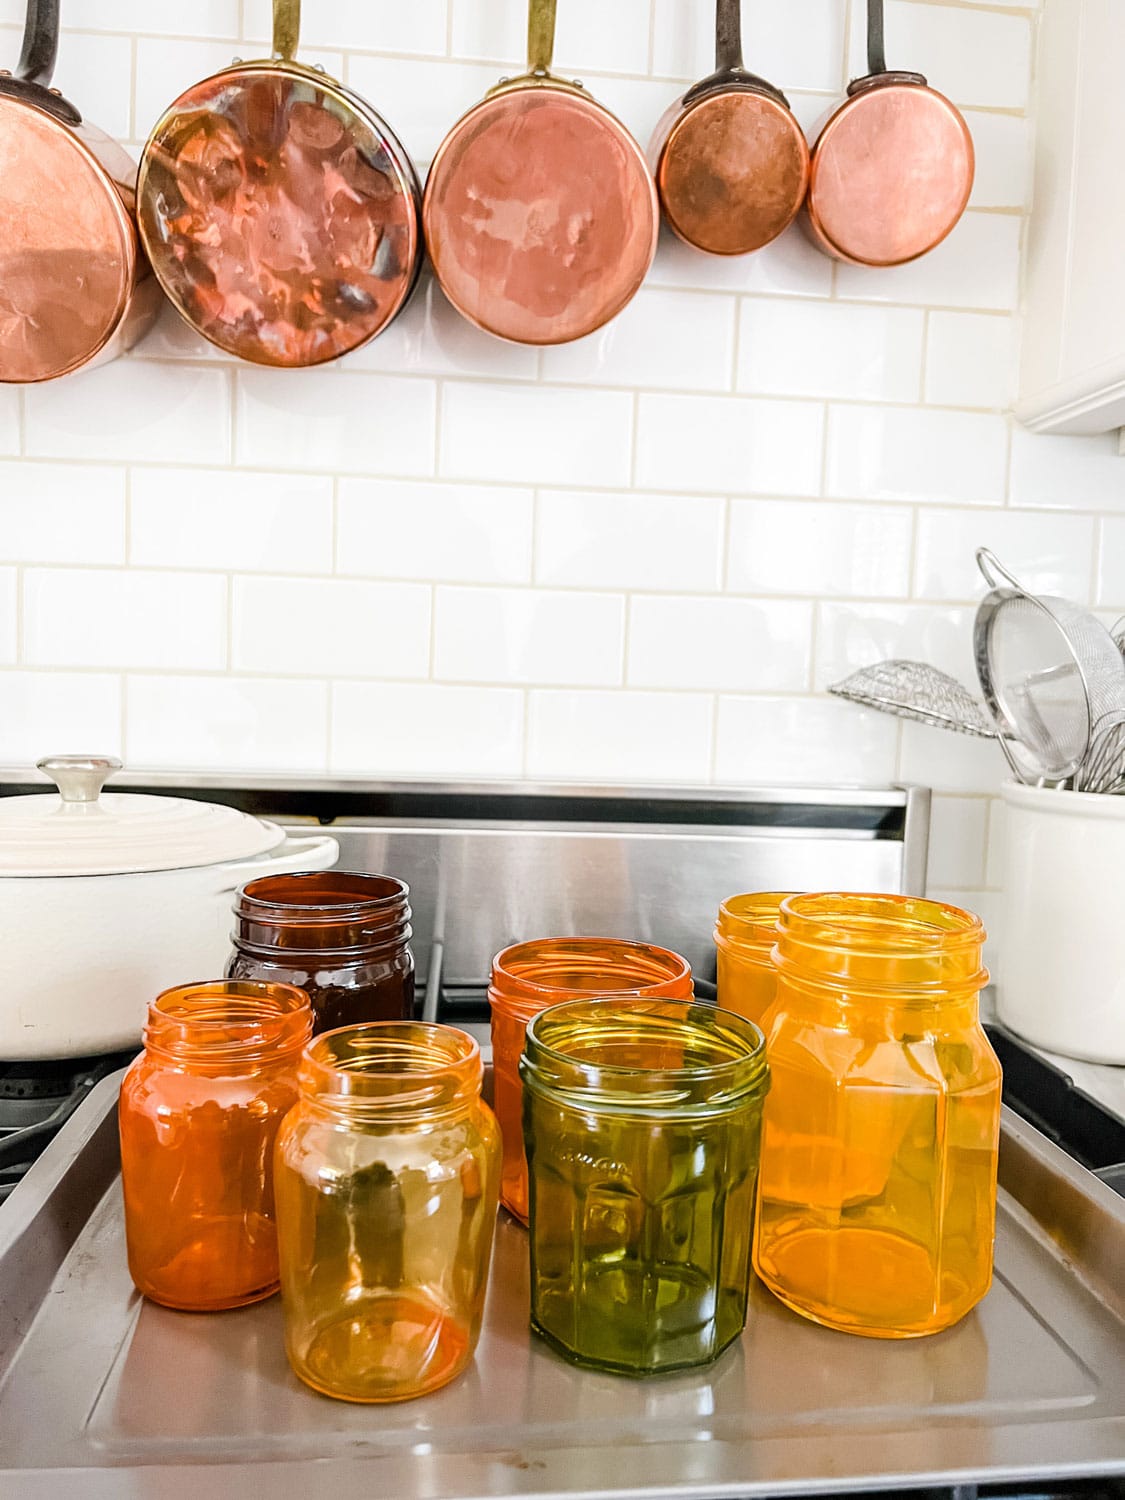 https://mostlovelythings.com/wp-content/uploads/2023/05/tinted-glass-jars-out-of-the-oven.jpg